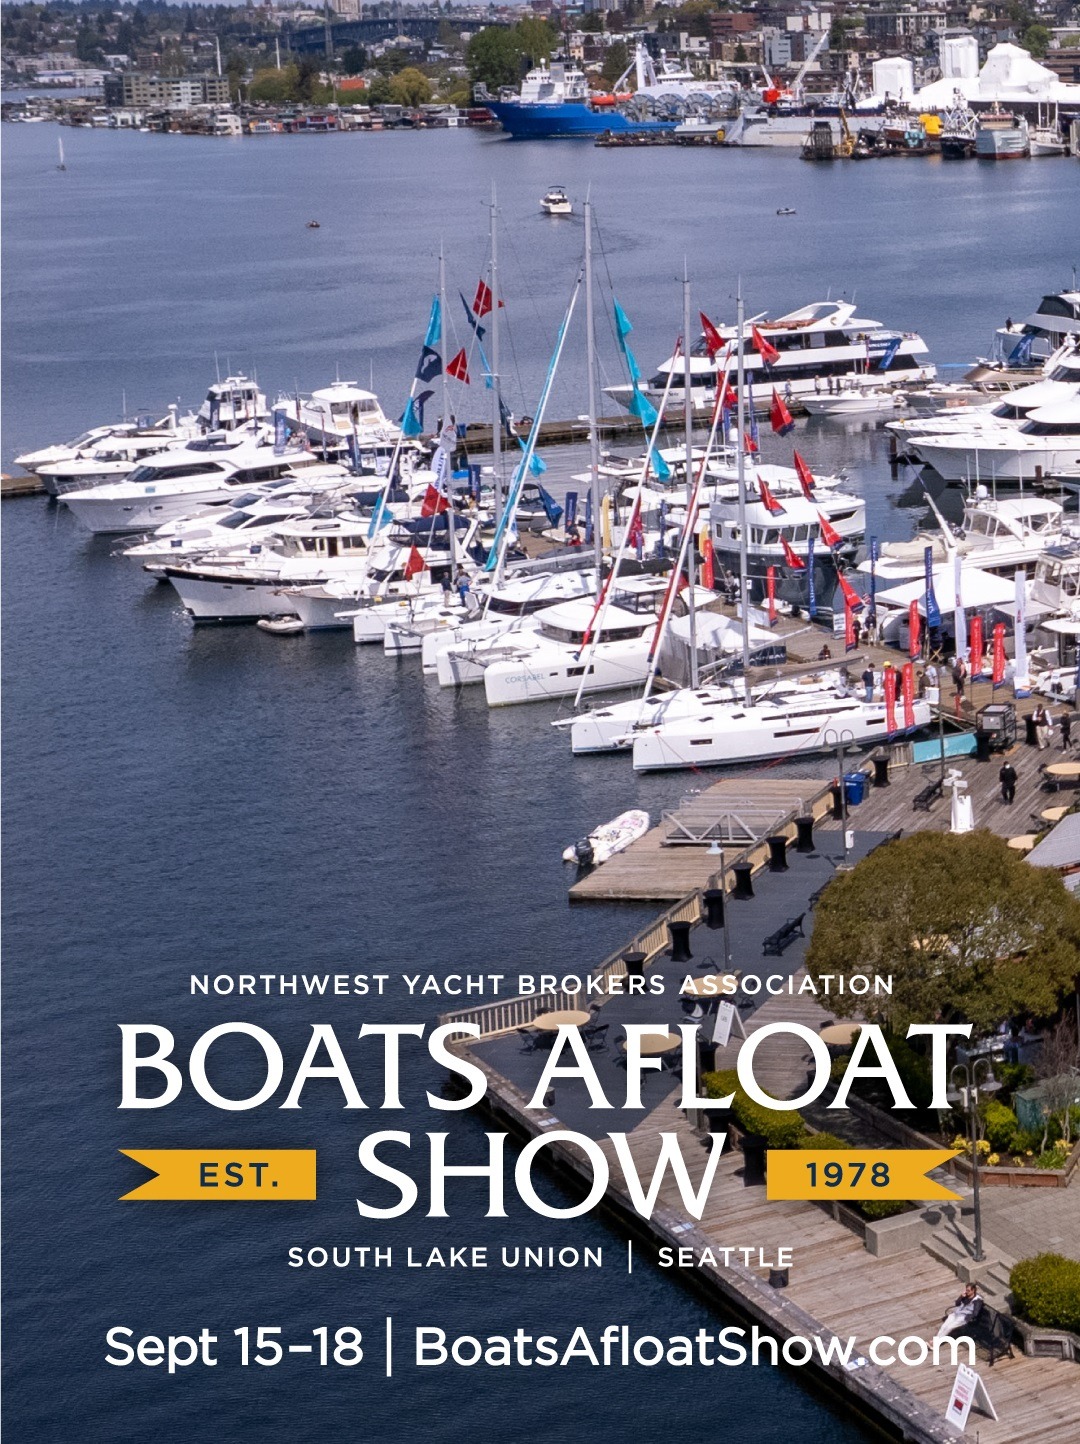 Seattle boat show ad